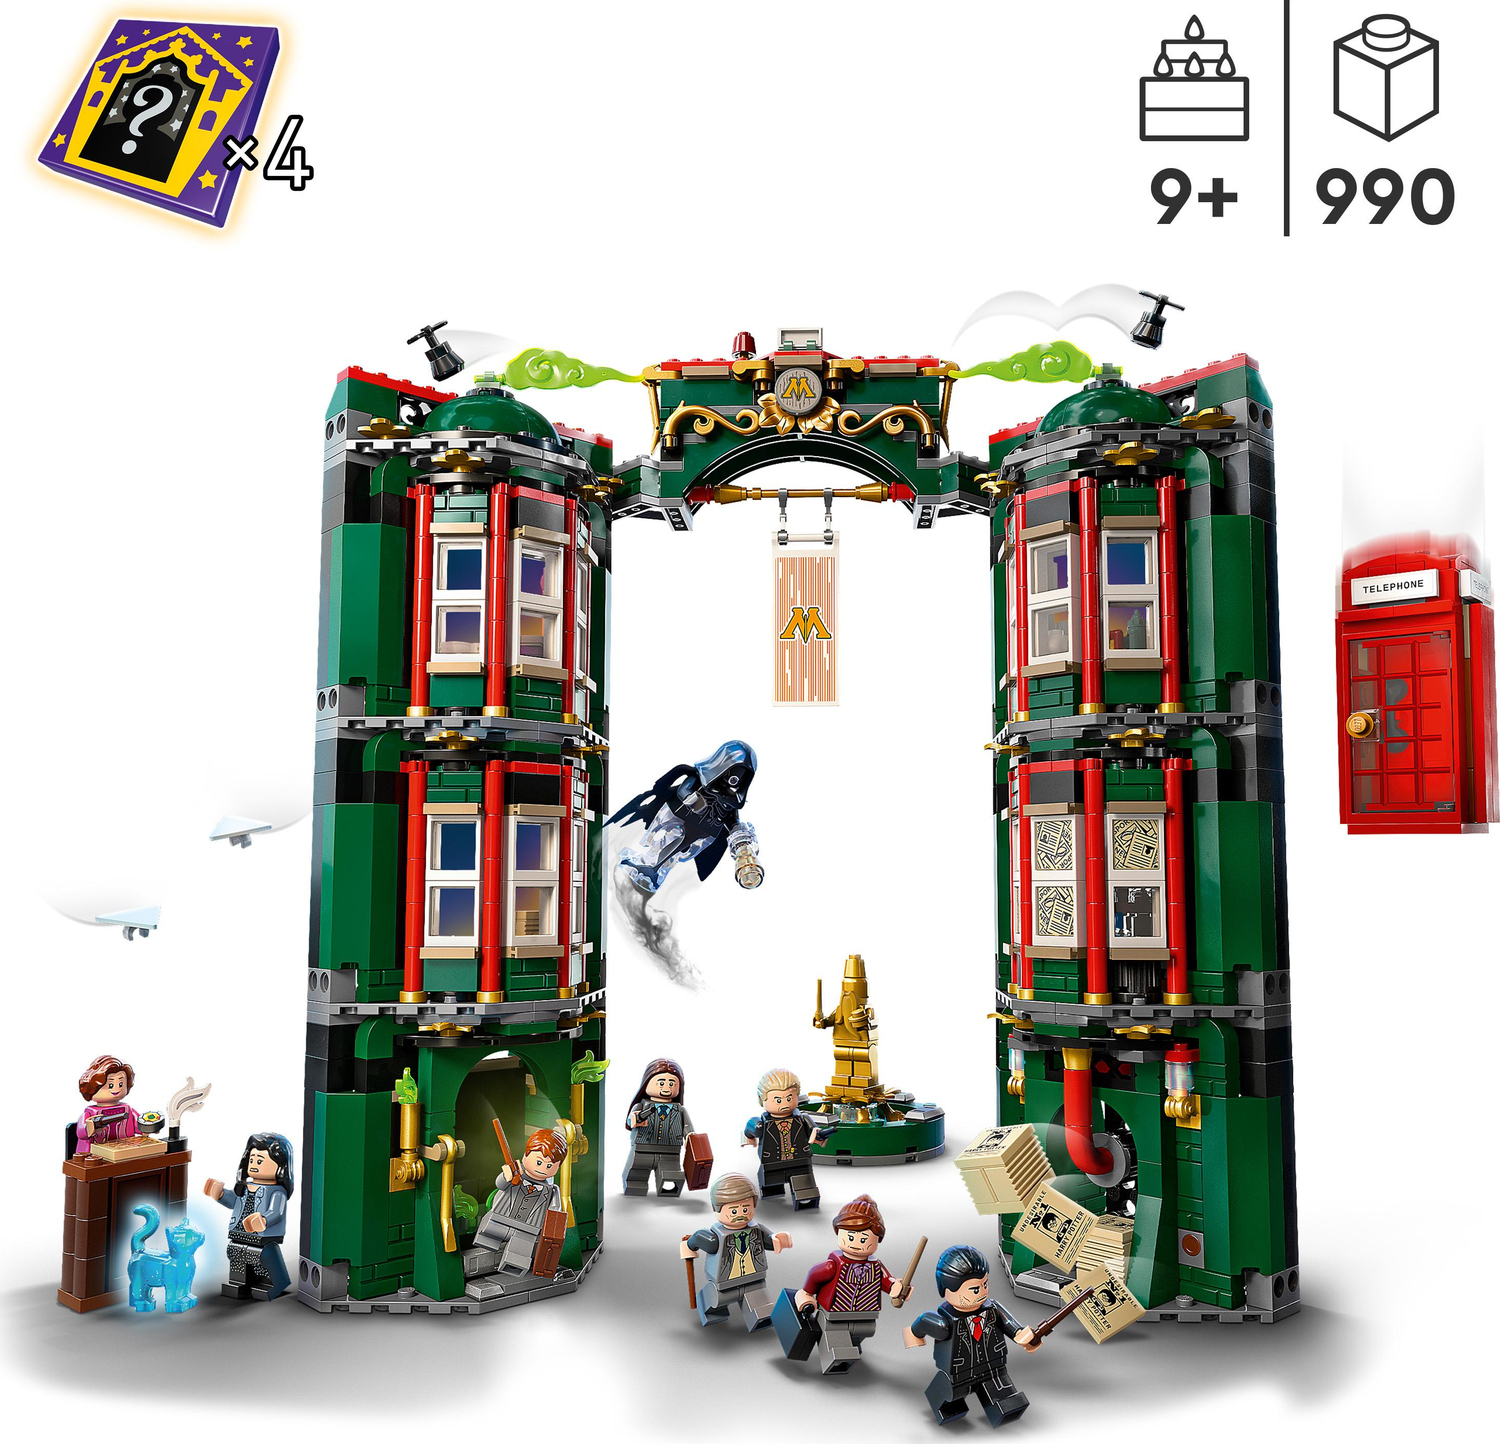 LEGO Harry Potter The Ministry of Magic Toy